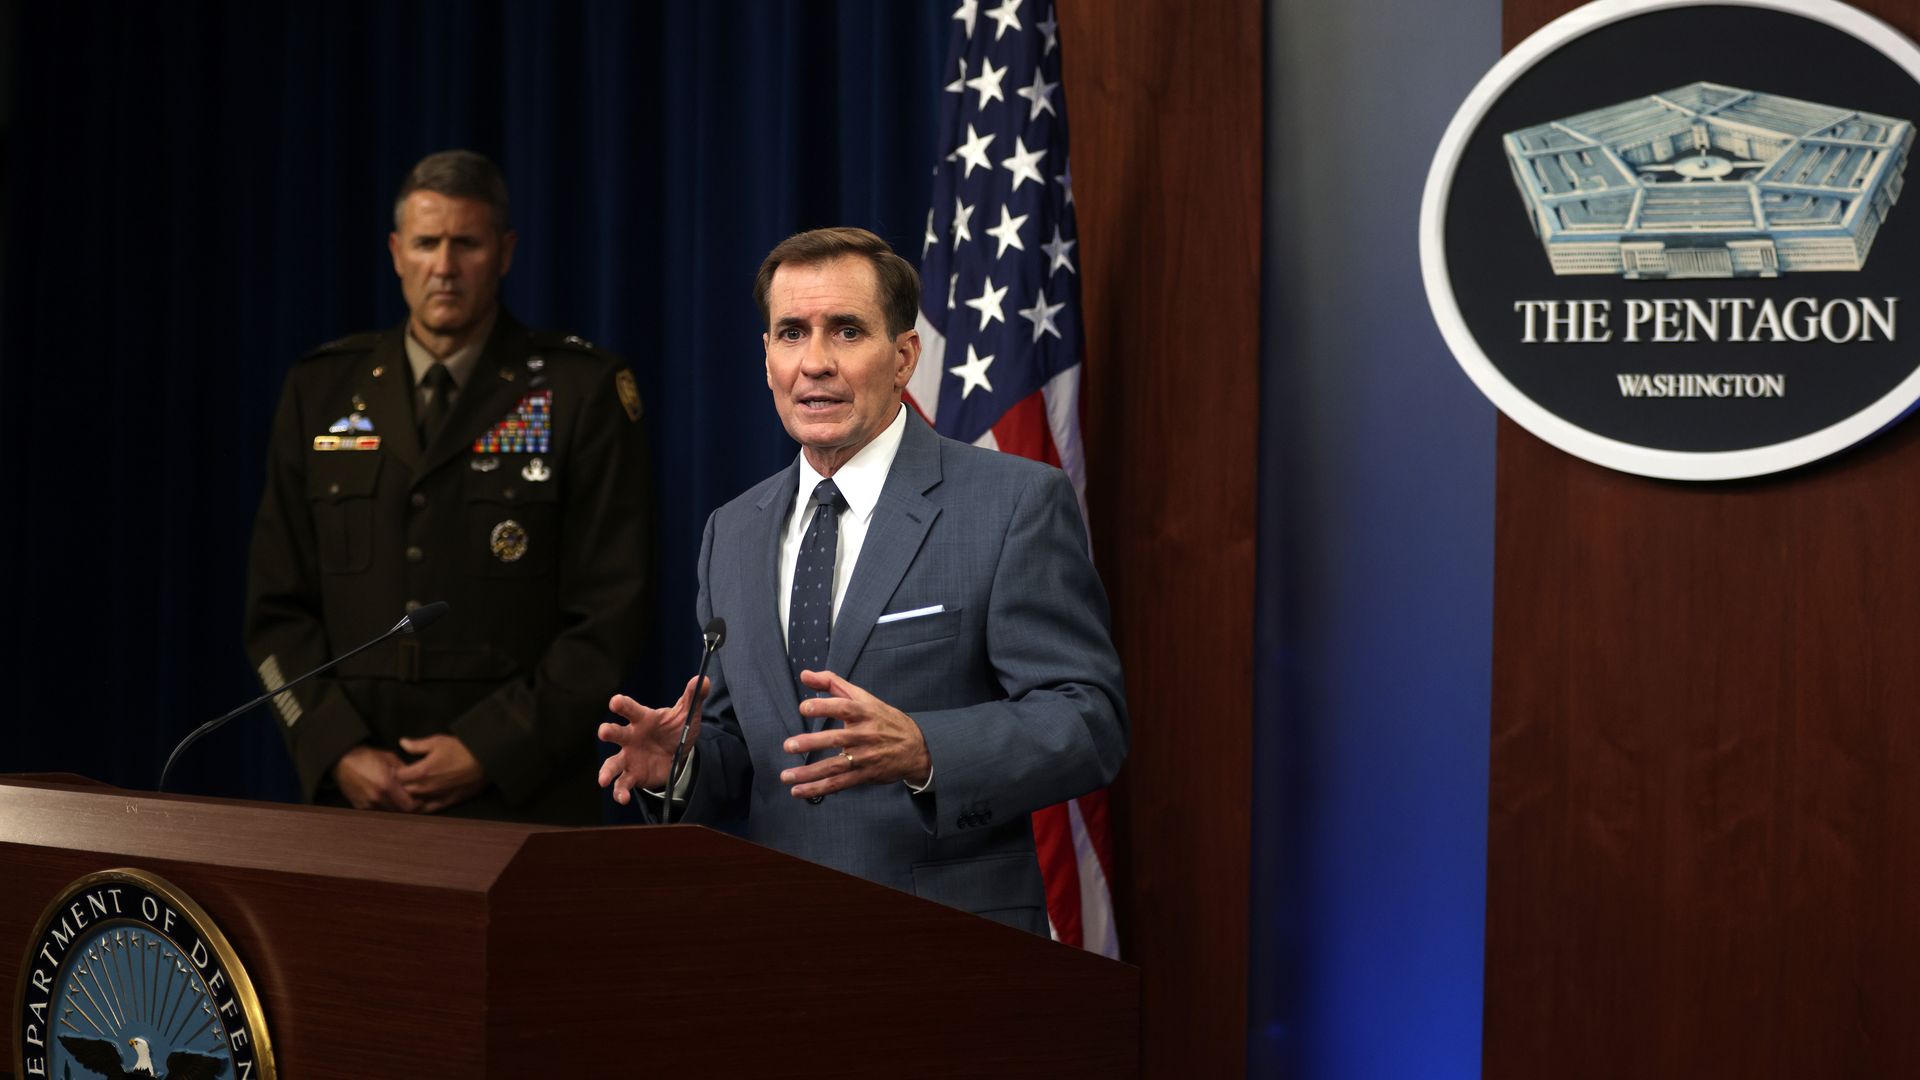 U.S. Department of Defense Press Secretary John Kirby (R) speaks as Army Major General William Taylor (L) listens during a news briefing at the Pentagon August 17, 2021